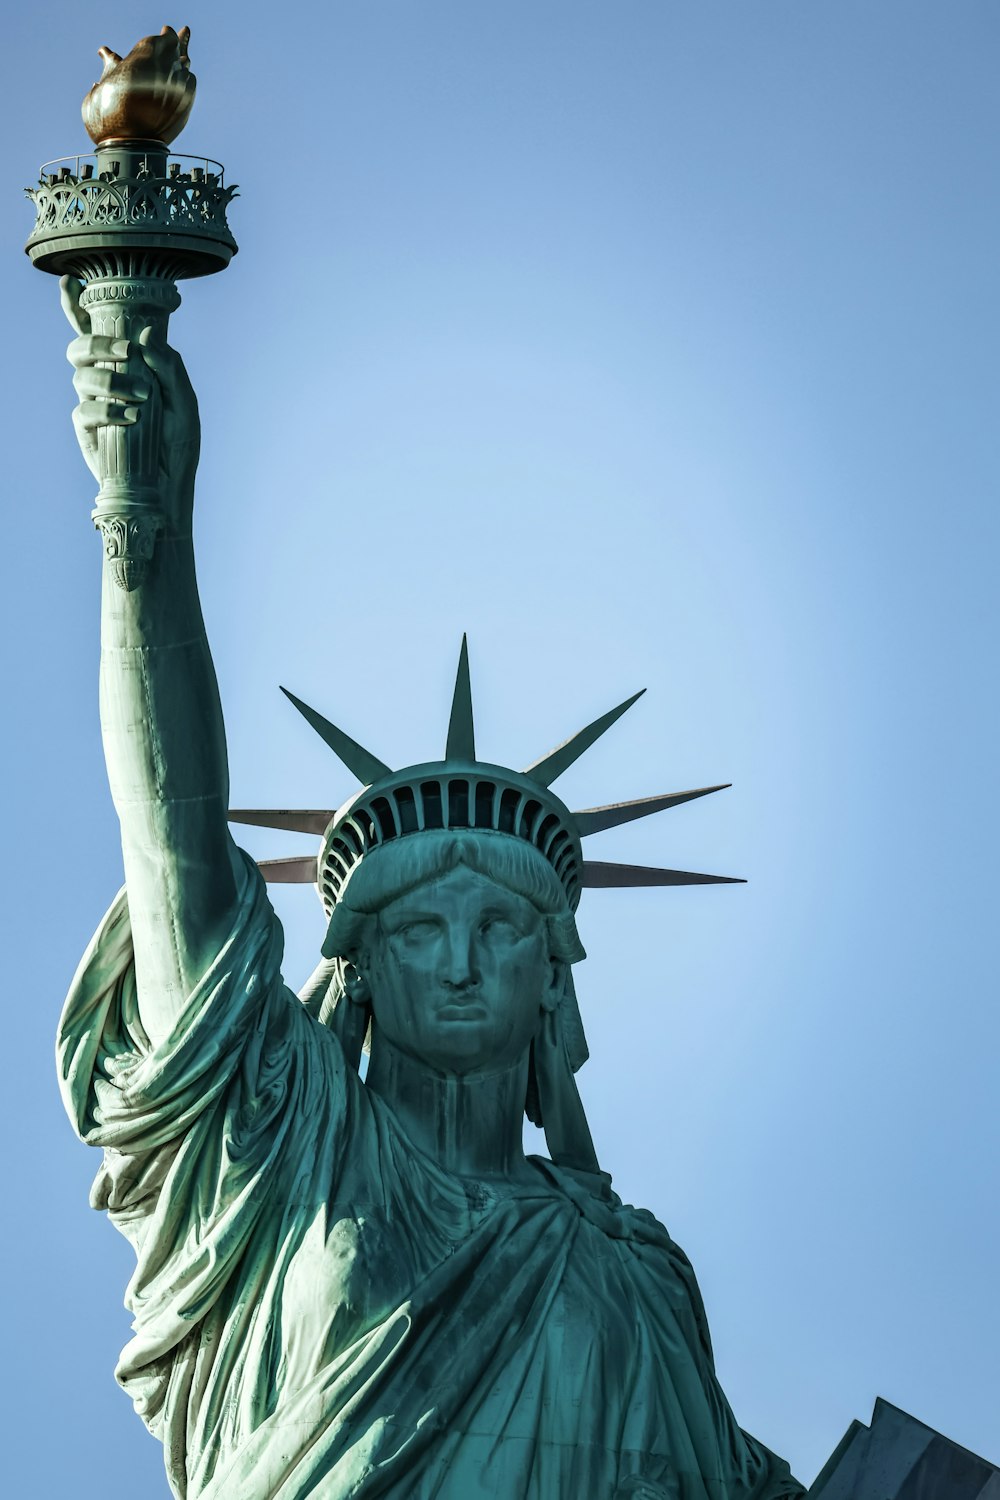 the statue of liberty is holding the torch of liberty